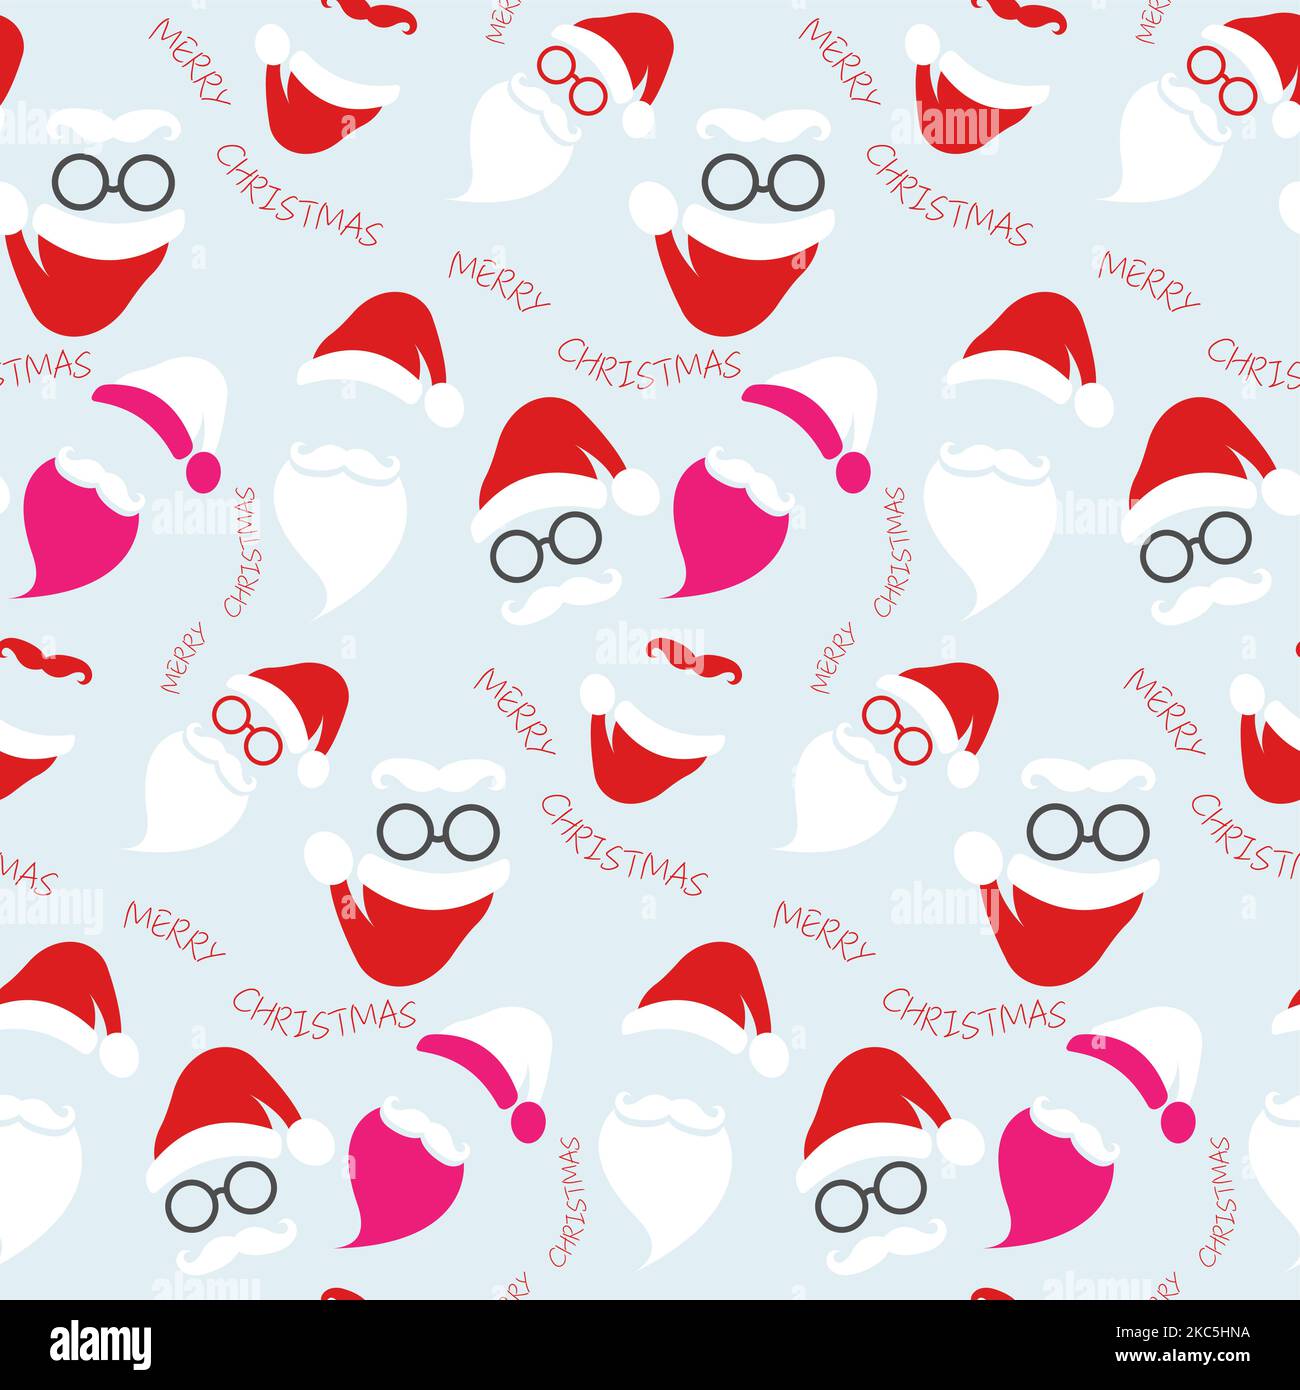 Seamless Santa Claus pattern fashion hipster style set icons. Santa hats, moustache and beards, glasses. Merry Christmas elements Stock Vector